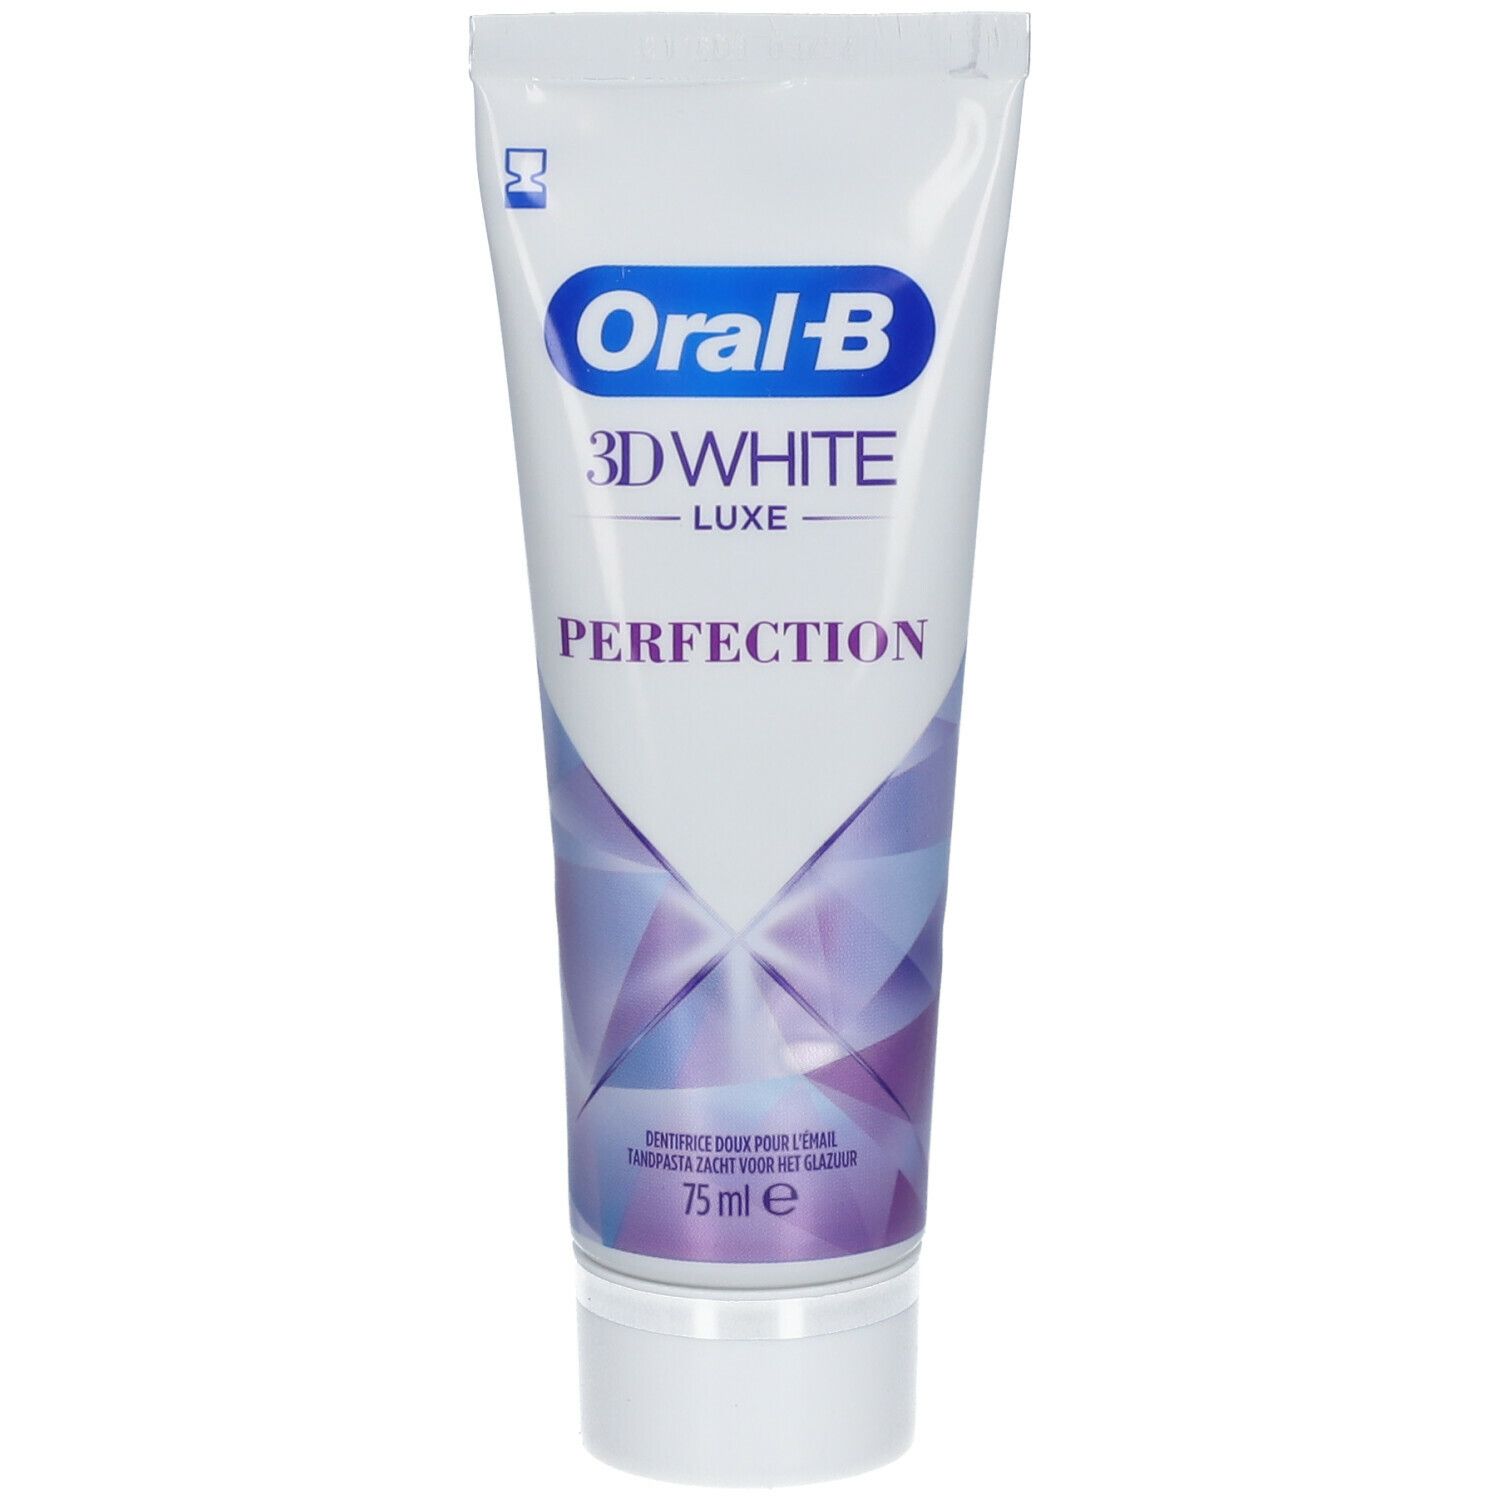 Oral-B 3D White Luxe Perfection Blancheur Avancée Dentifrice